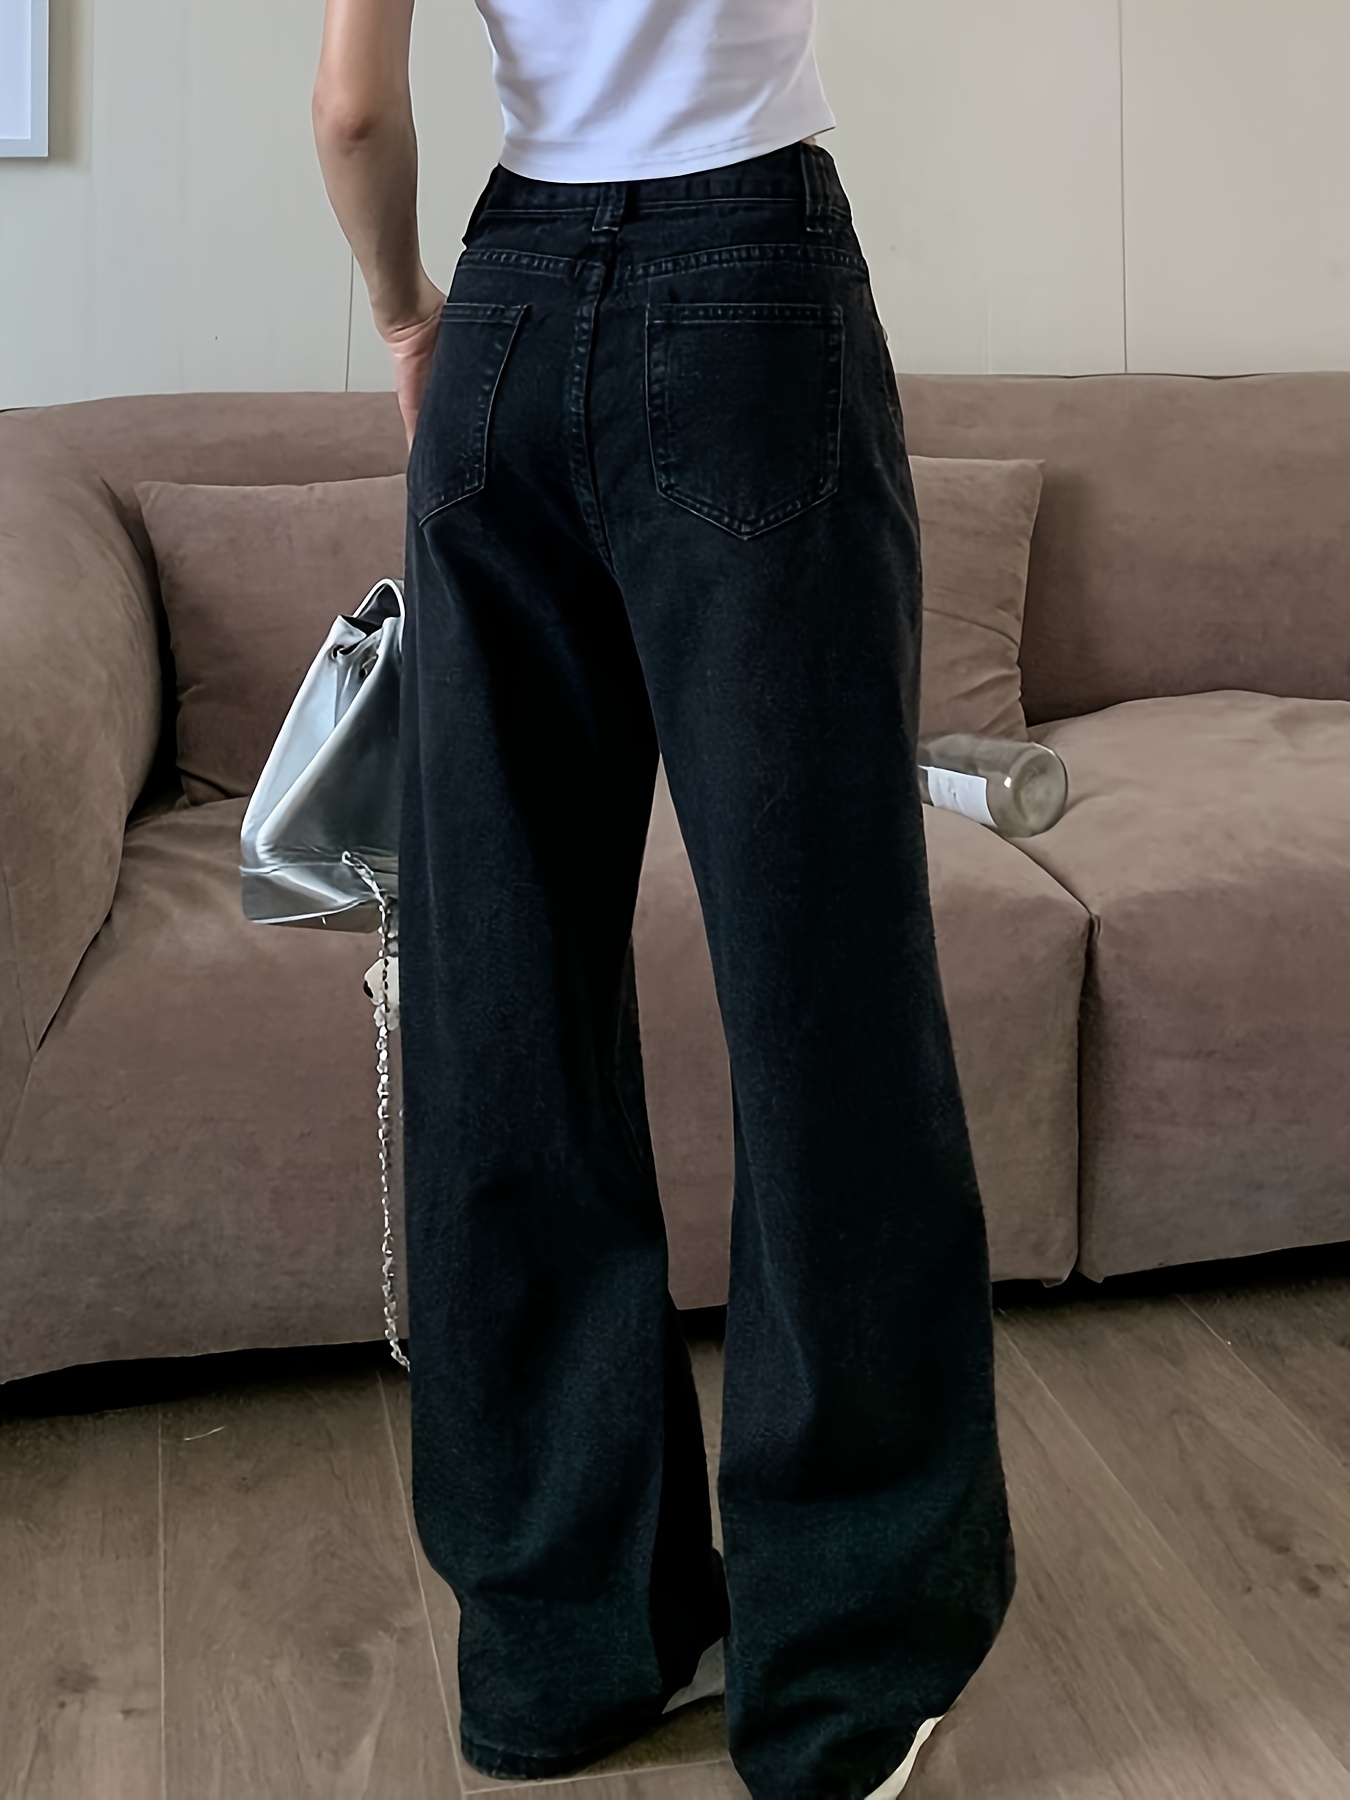 5'0 ~153cm] First time trying baggy jeans and love it so much! I used to  always only buy high waisted & straight cropped jeans at the ankle because  I was afraid oversized